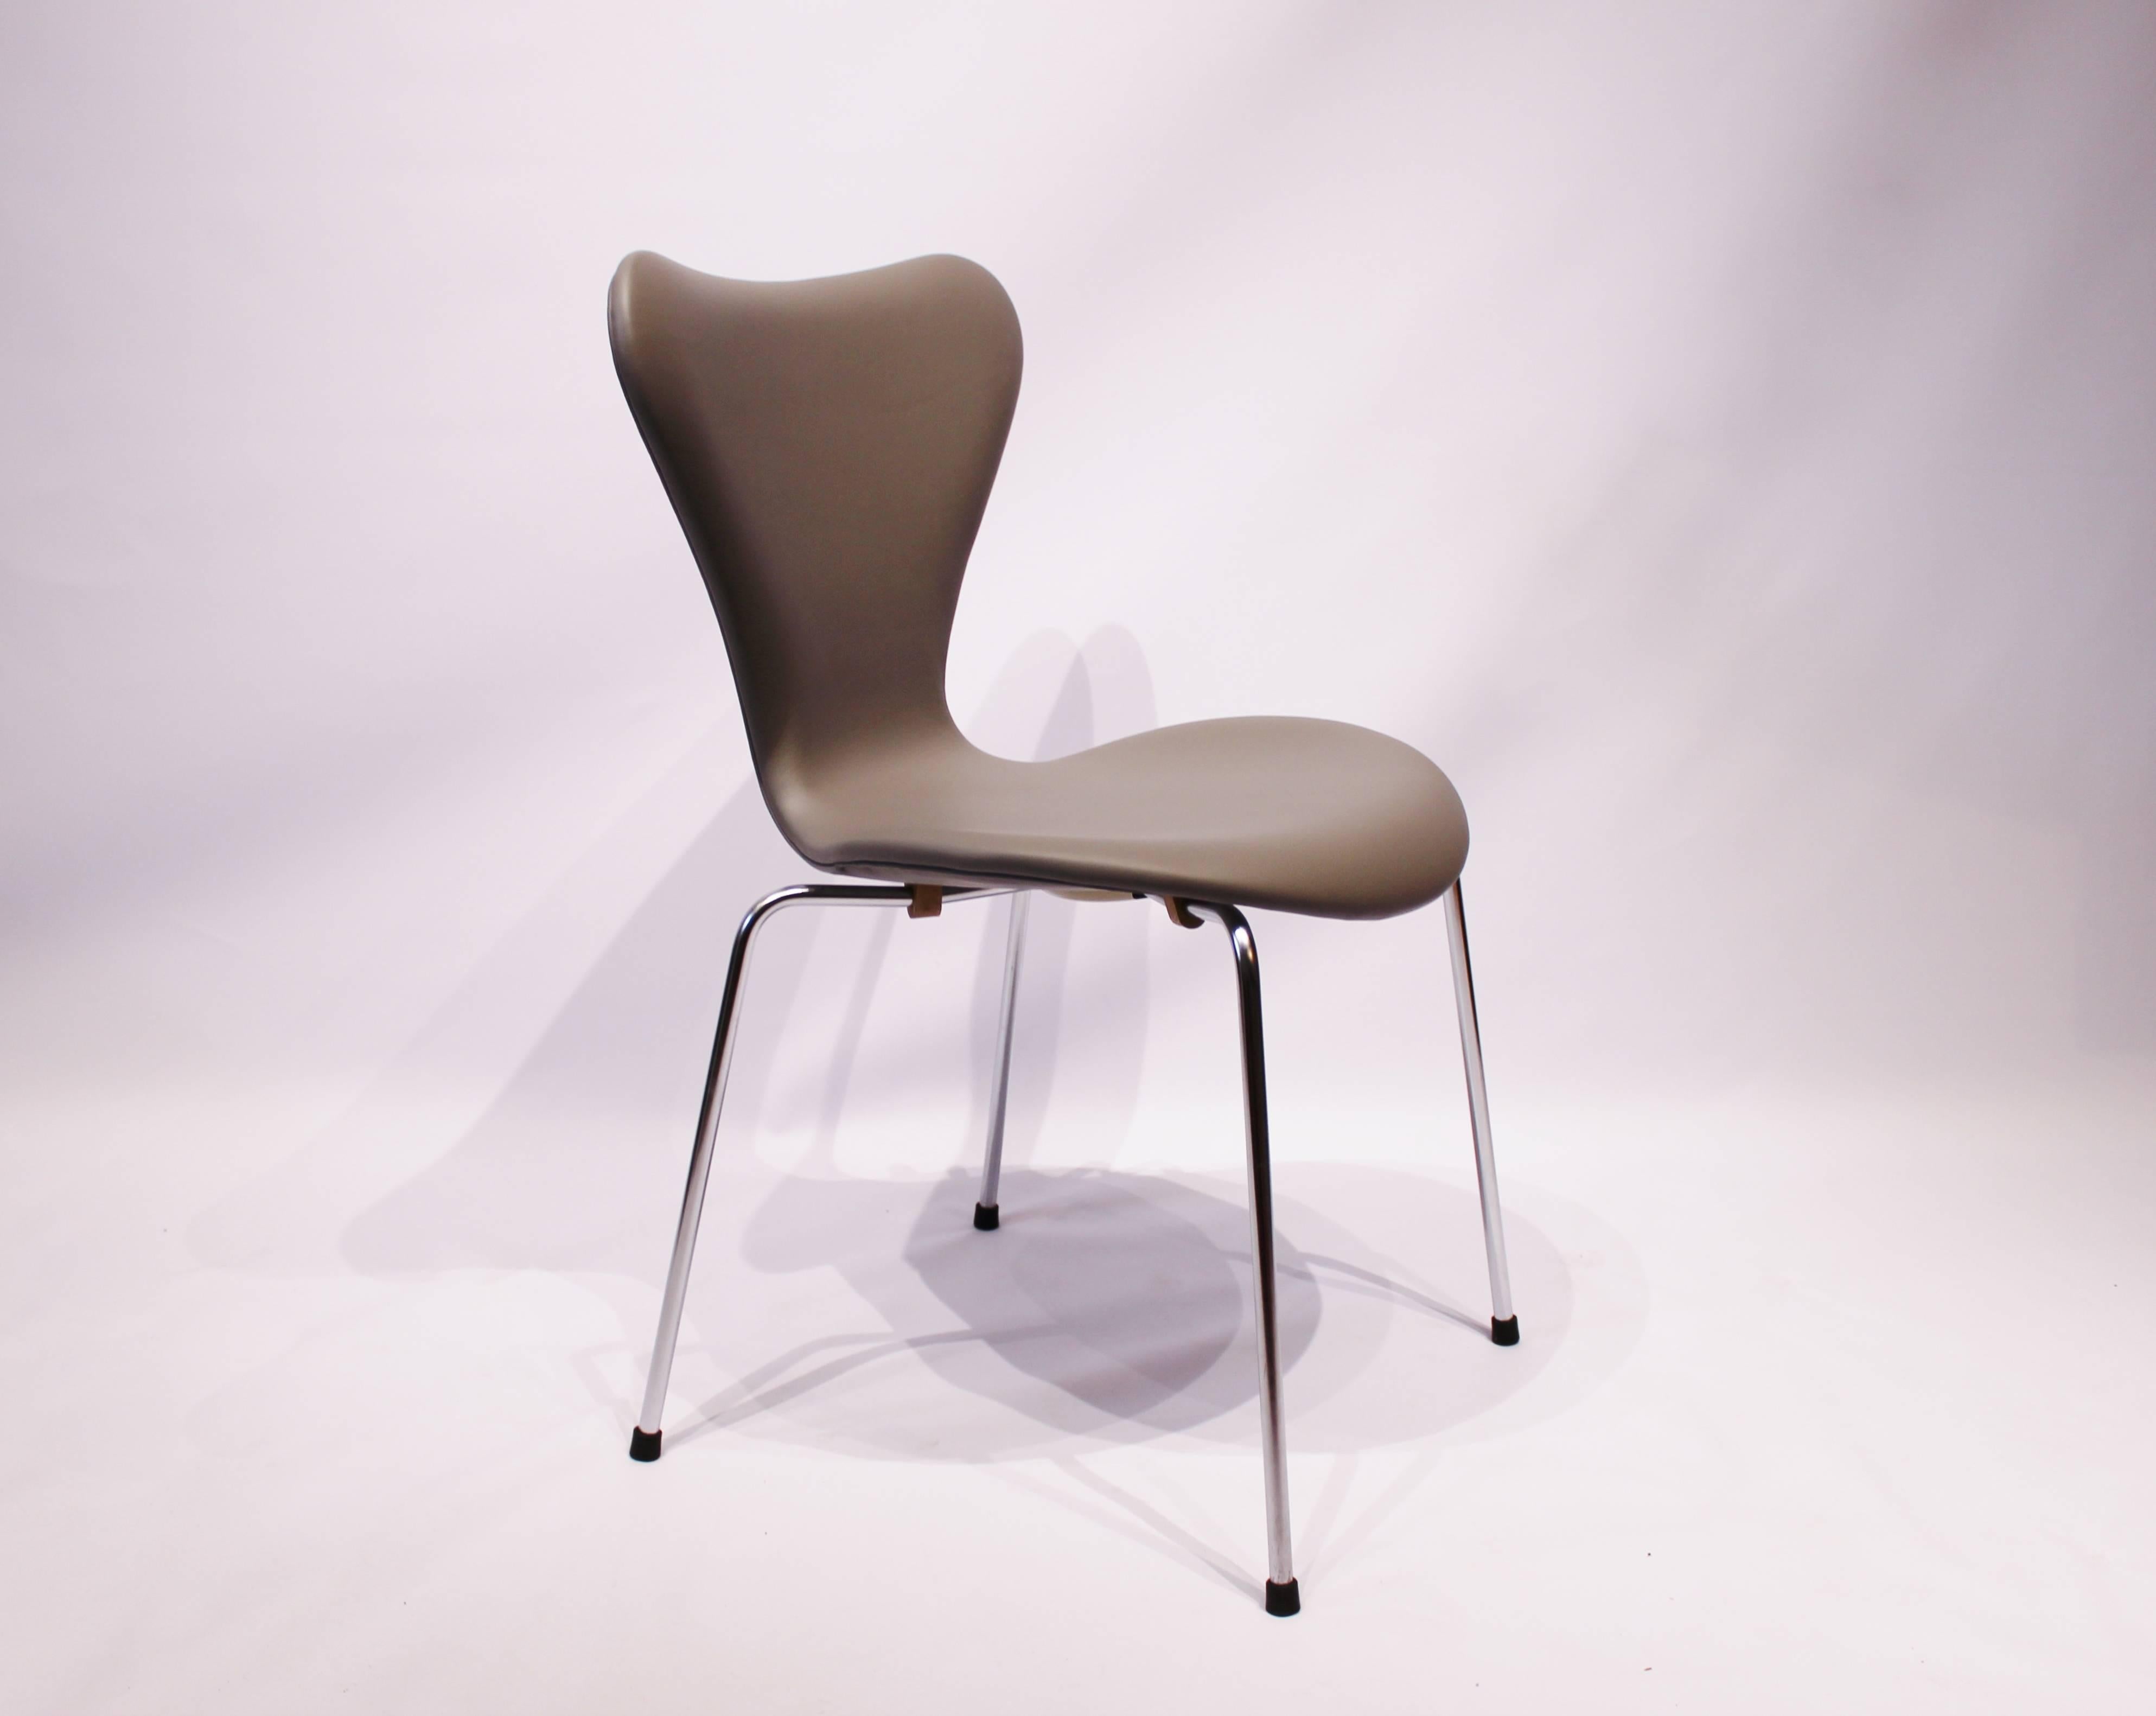 Seven chair, model 3107, designed by Arne Jacobsen and manufactured by Fritz Hansen in the 1980s. The chair is newly upholstered in light grey classic leather. We can upholster more chairs in this leather or any other, if needed.